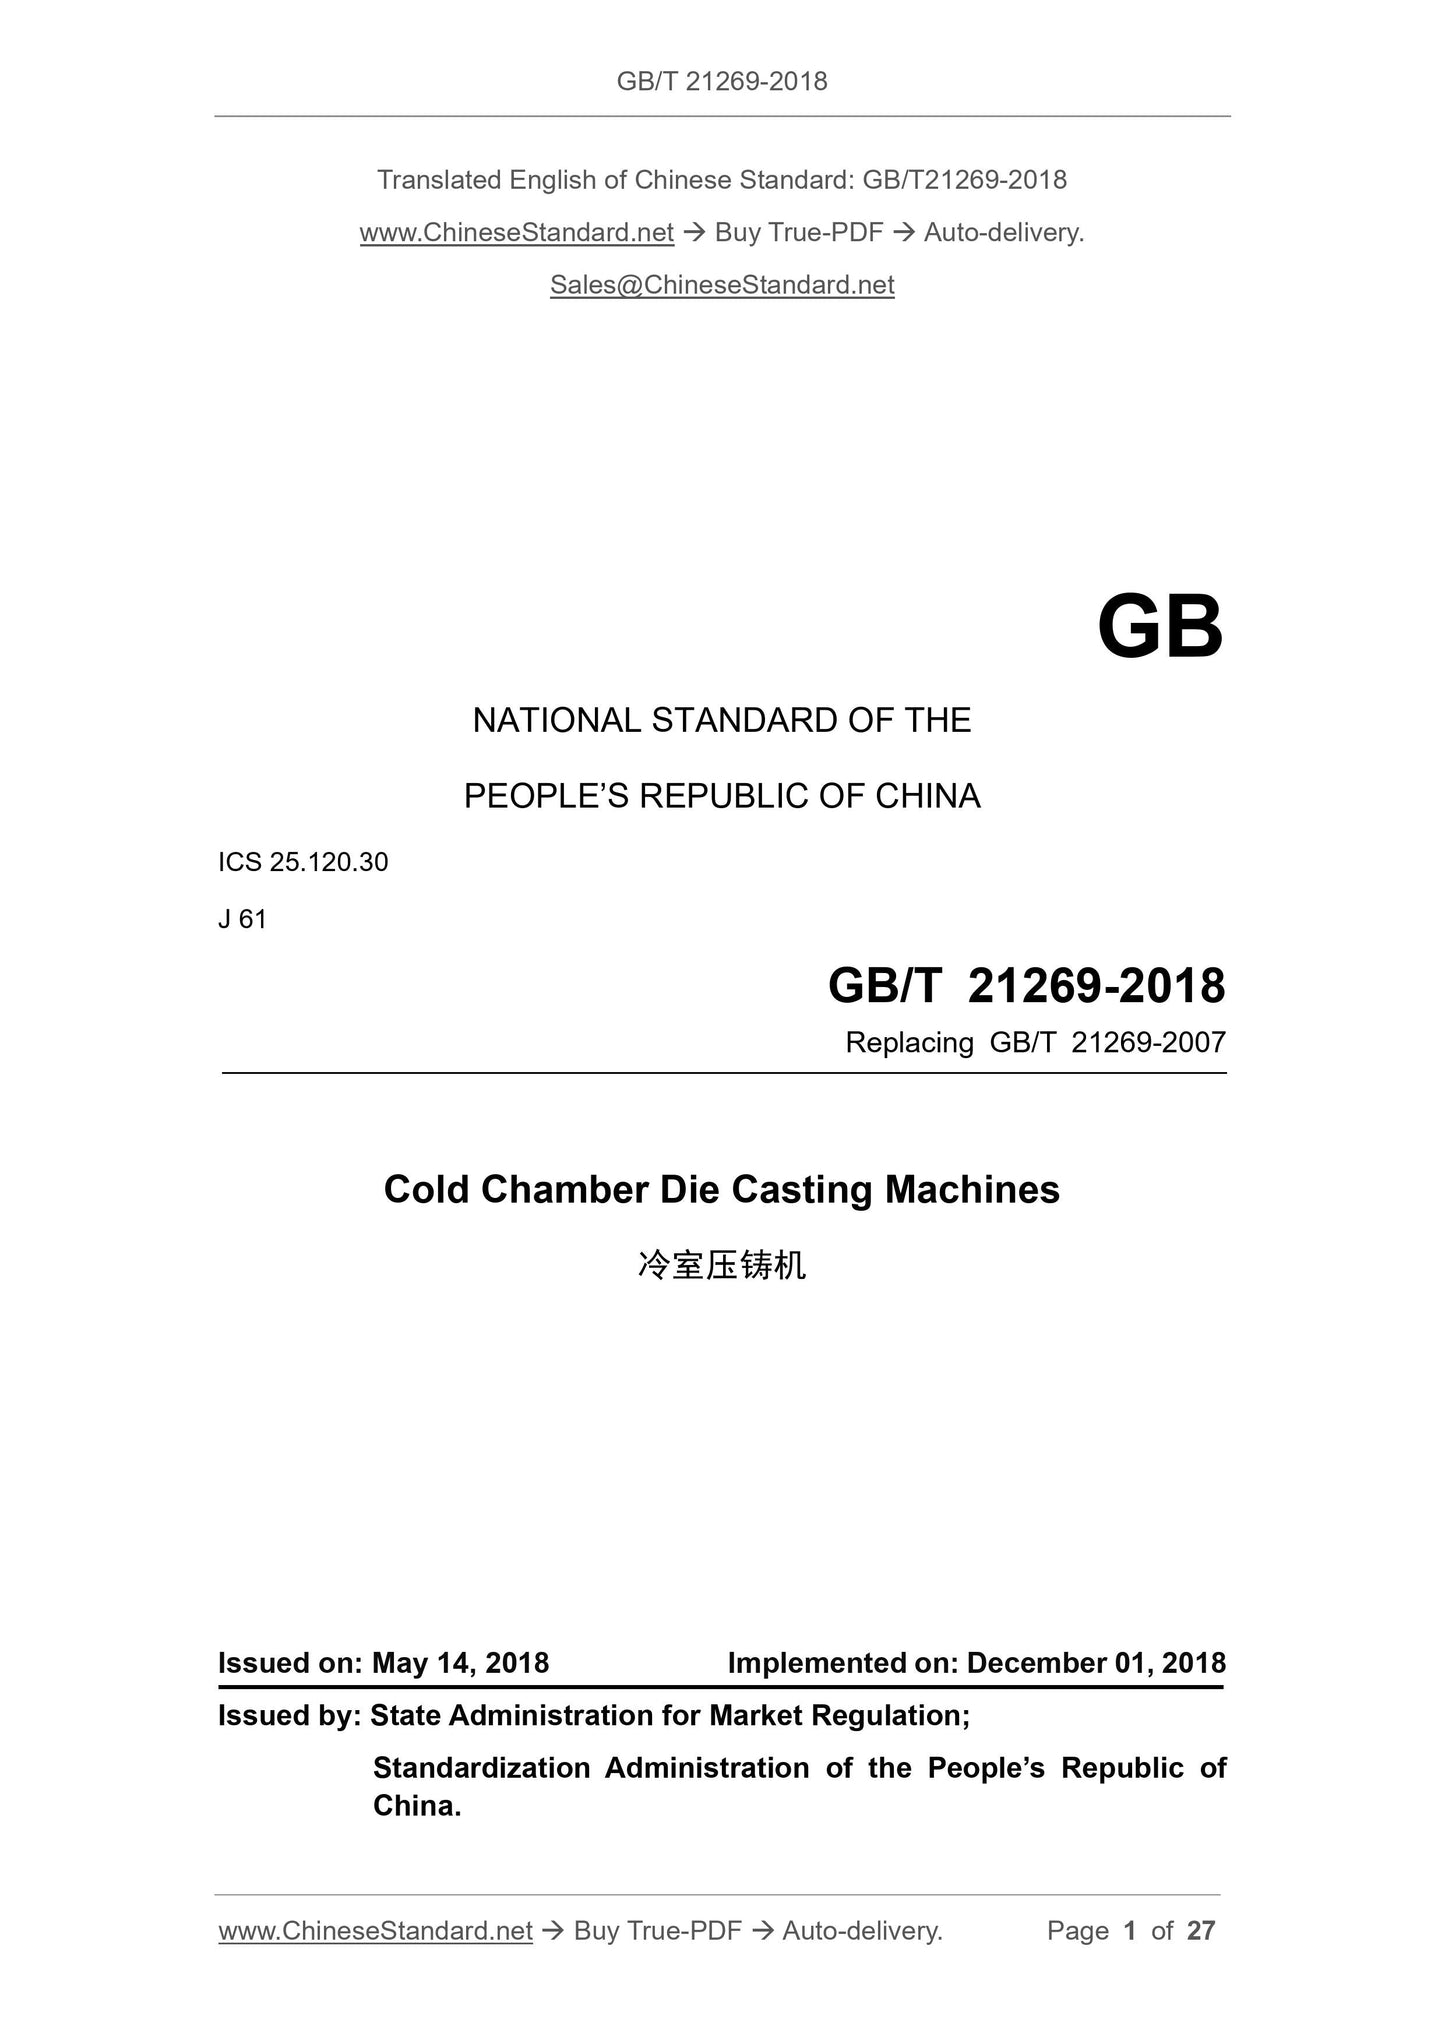 GB/T 21269-2018 Page 1